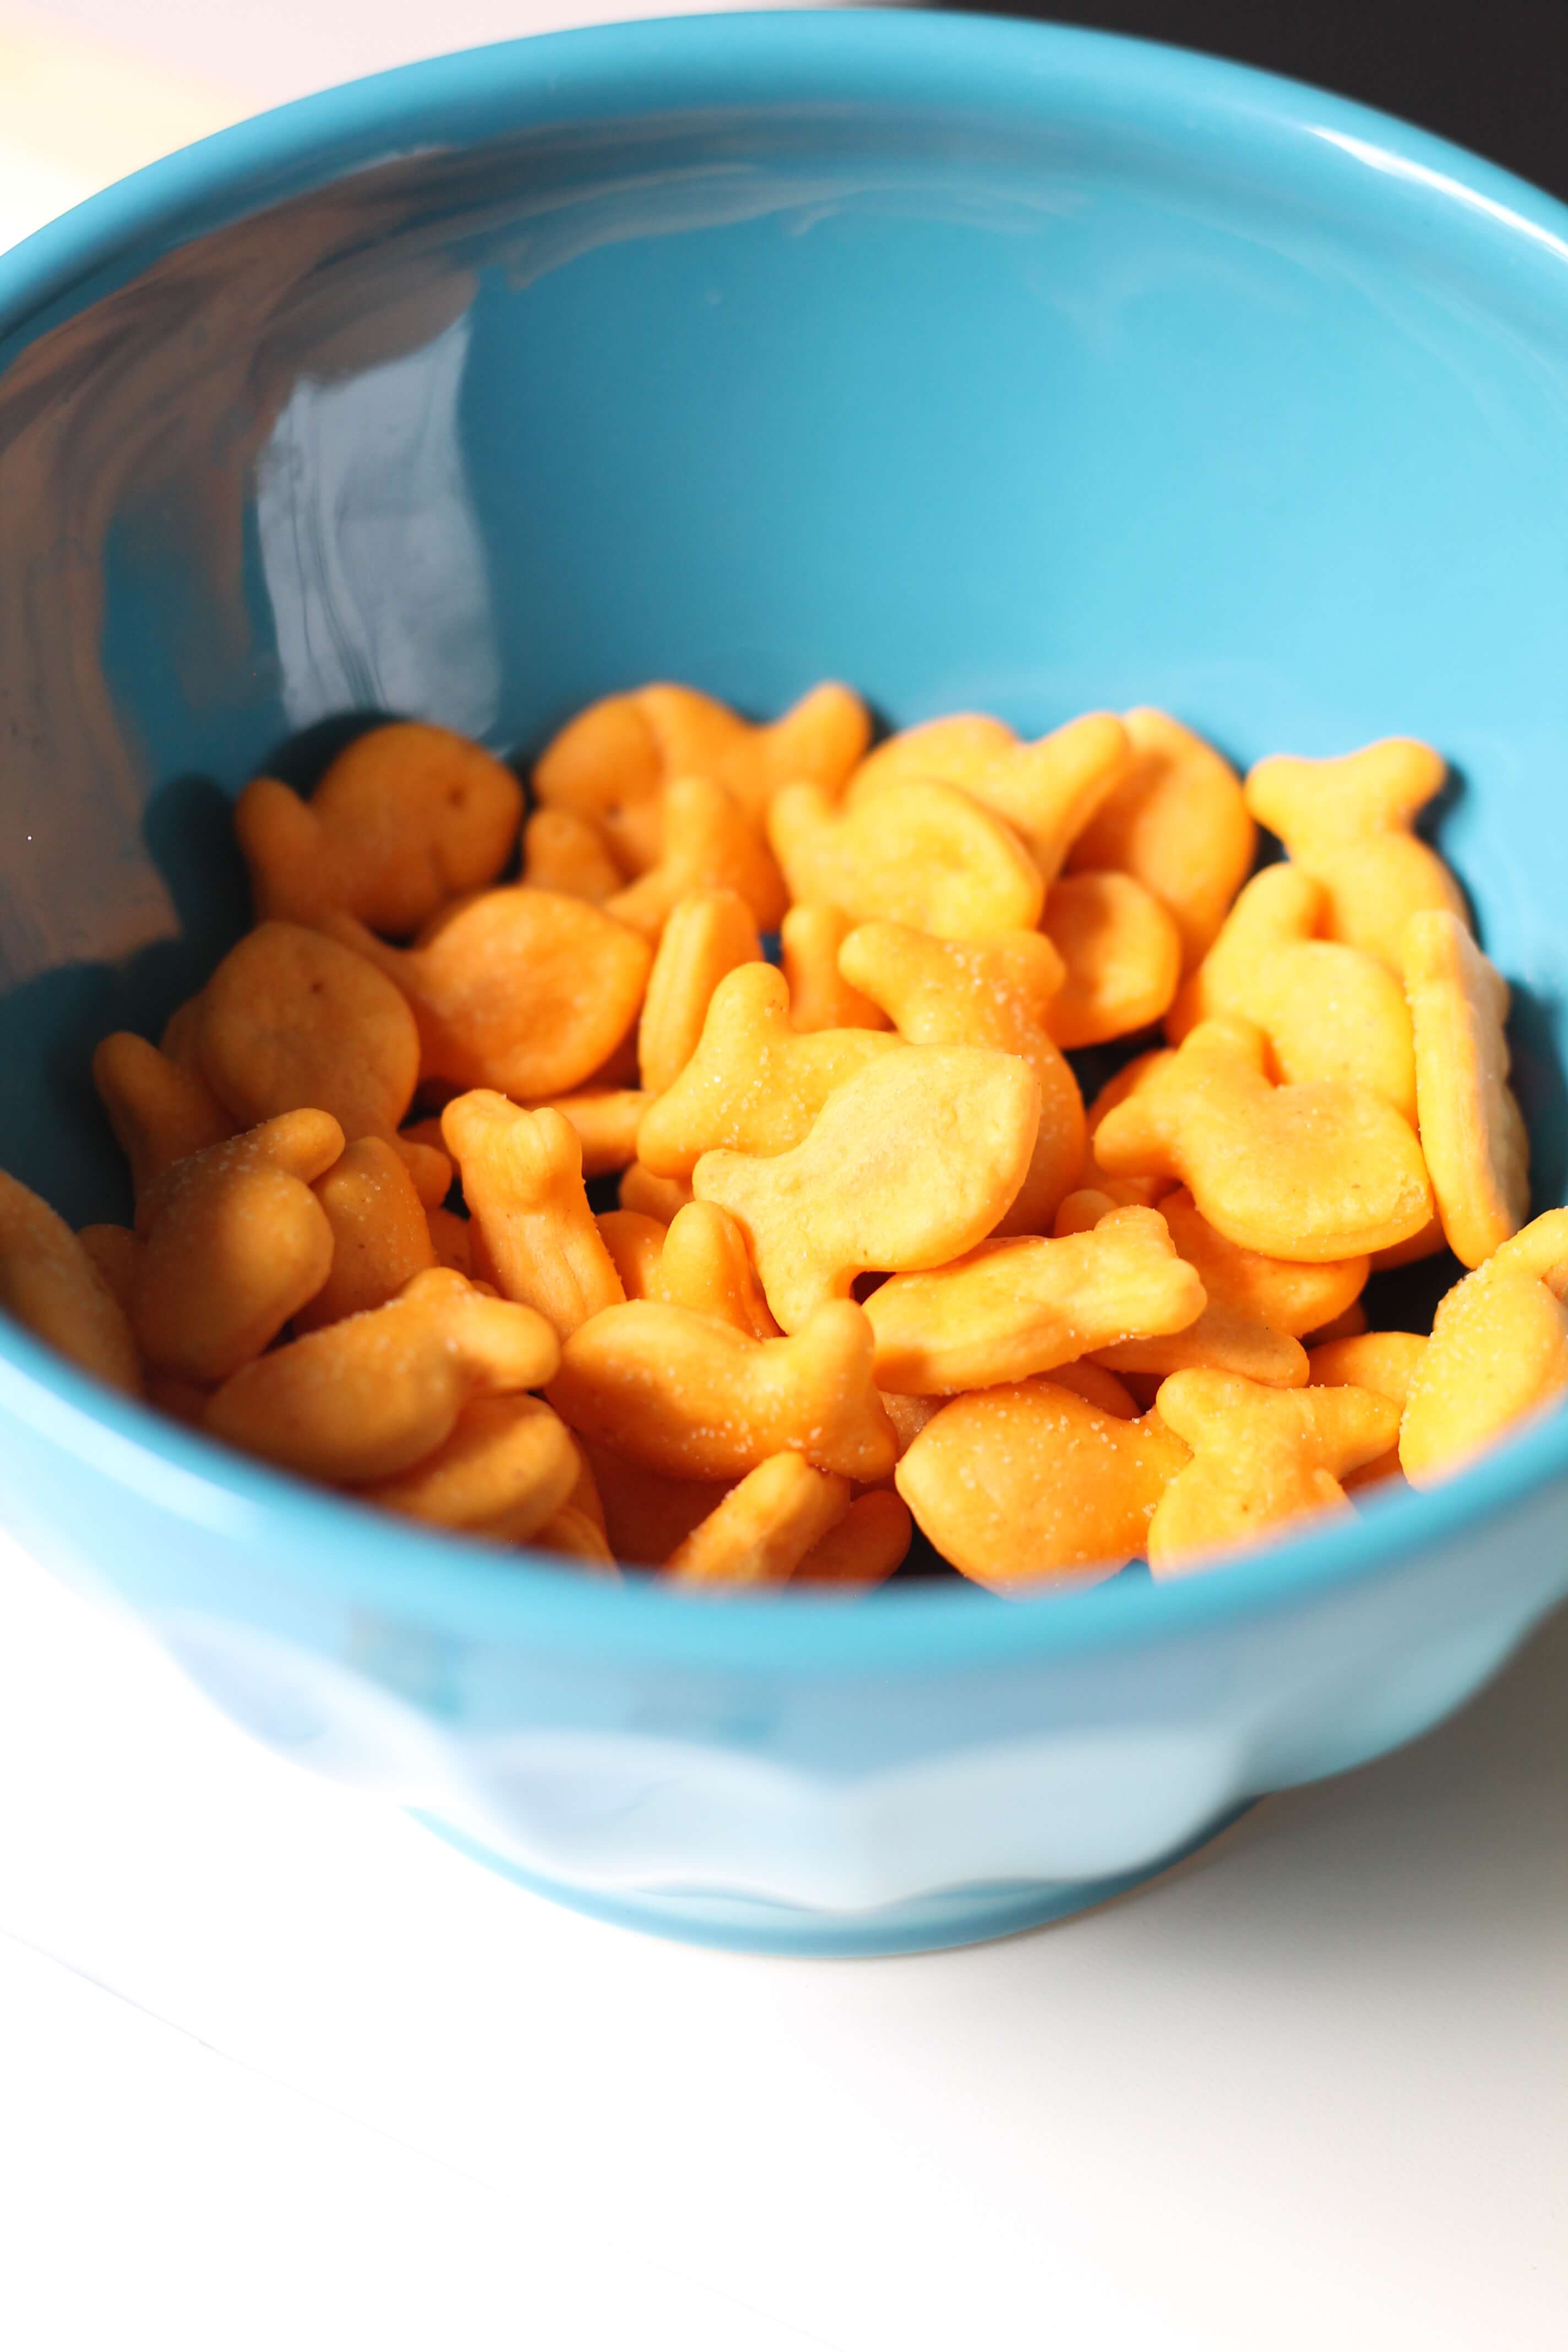 Goldfish crackers in an Anthro latte bowl for the win!